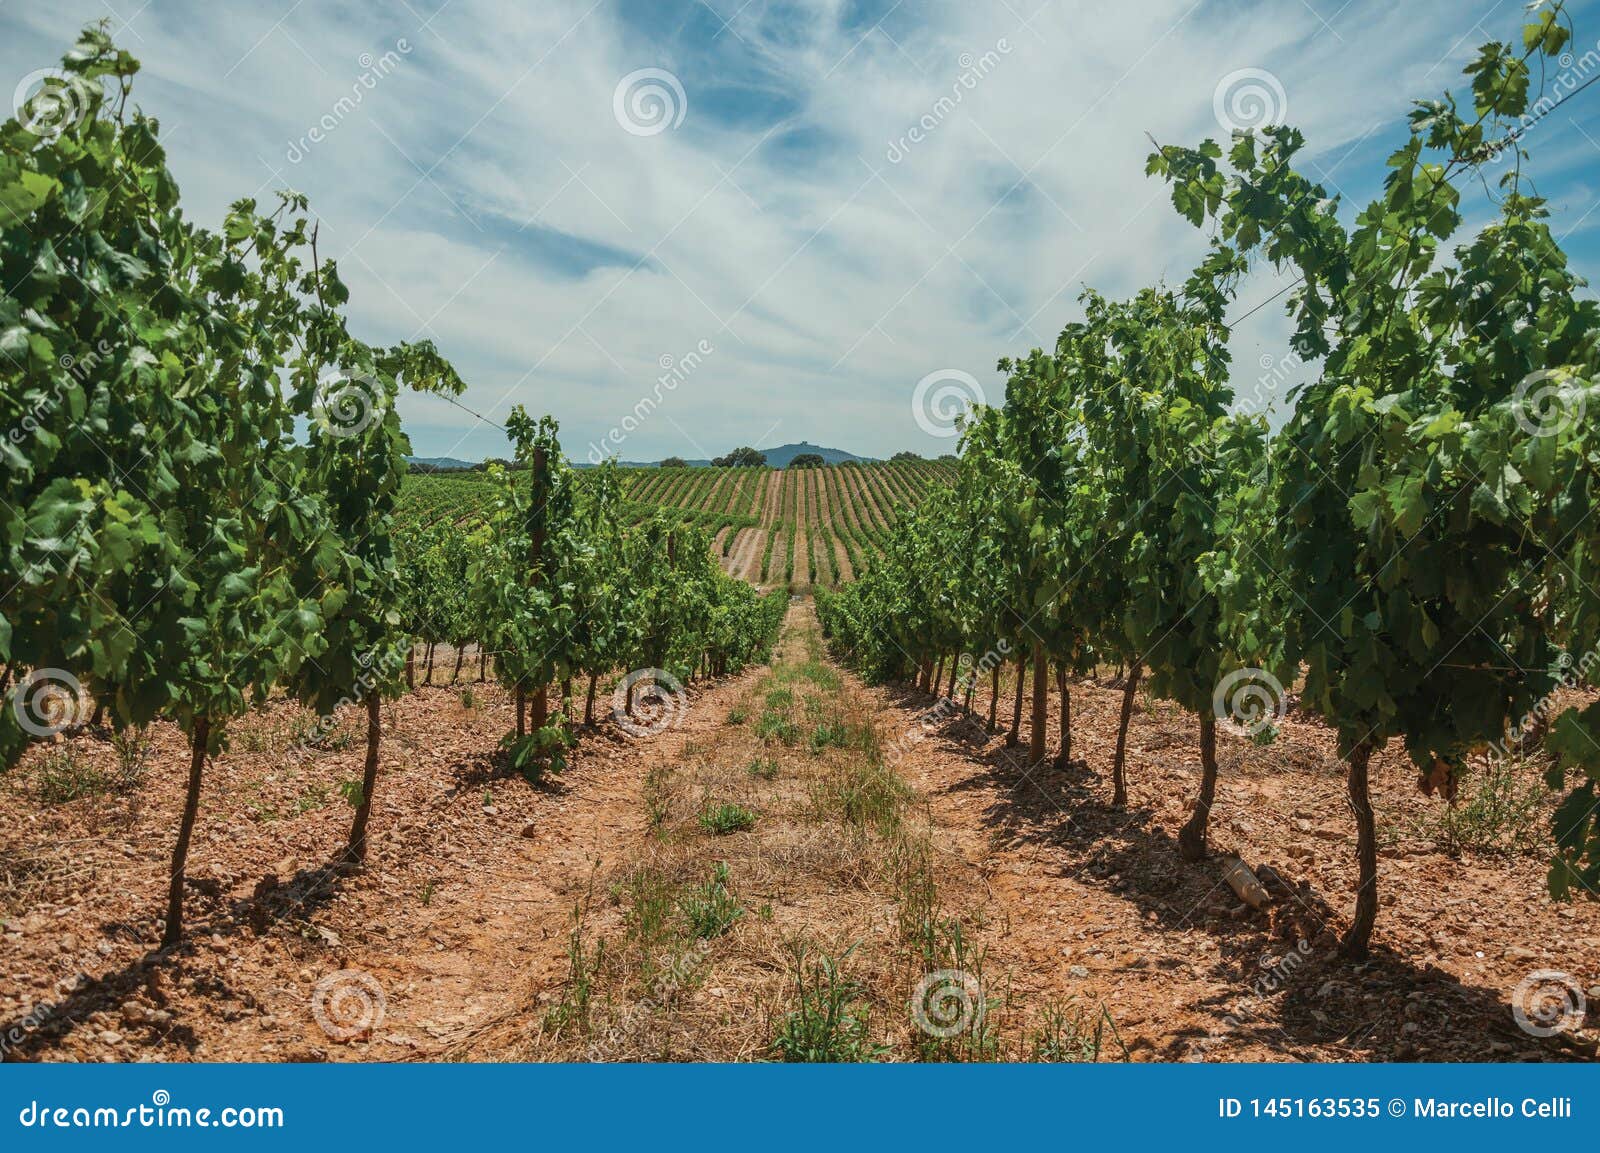 Parallel Vines Going Up The Hill In A Vineyard Near ...